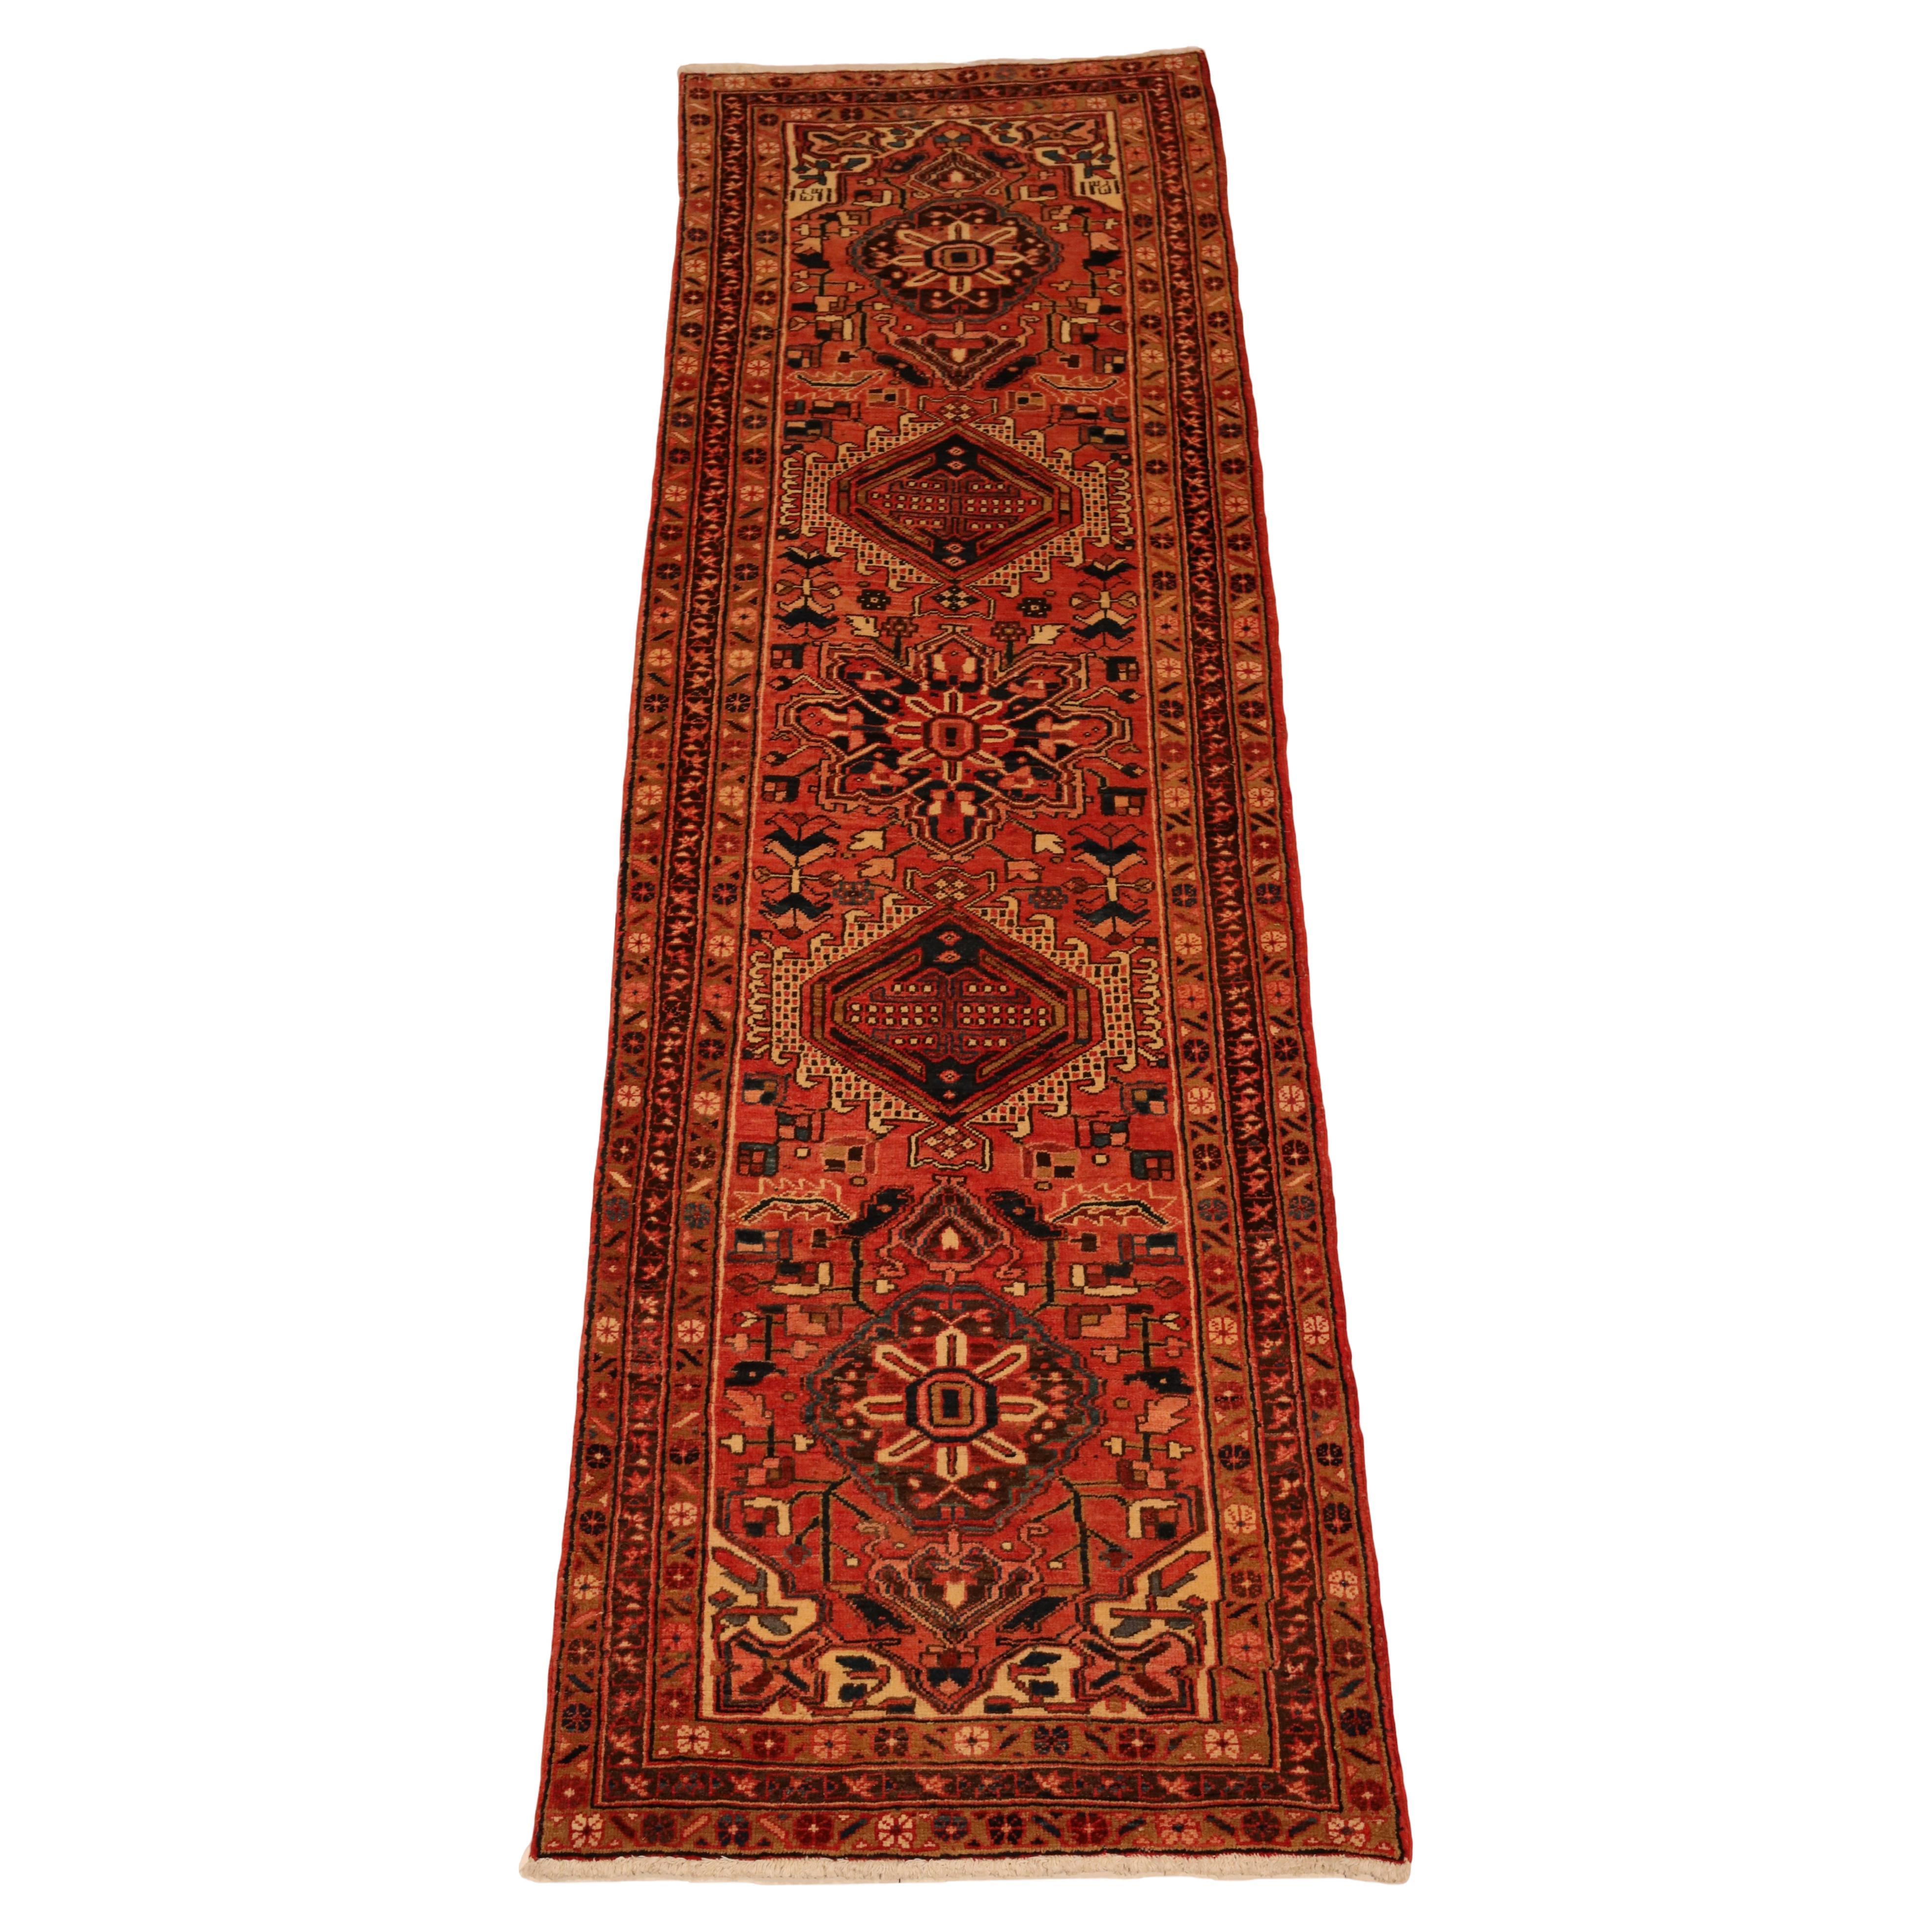 North-Western Persian Semi-Antique Runner - 3'3" x 10'9" For Sale